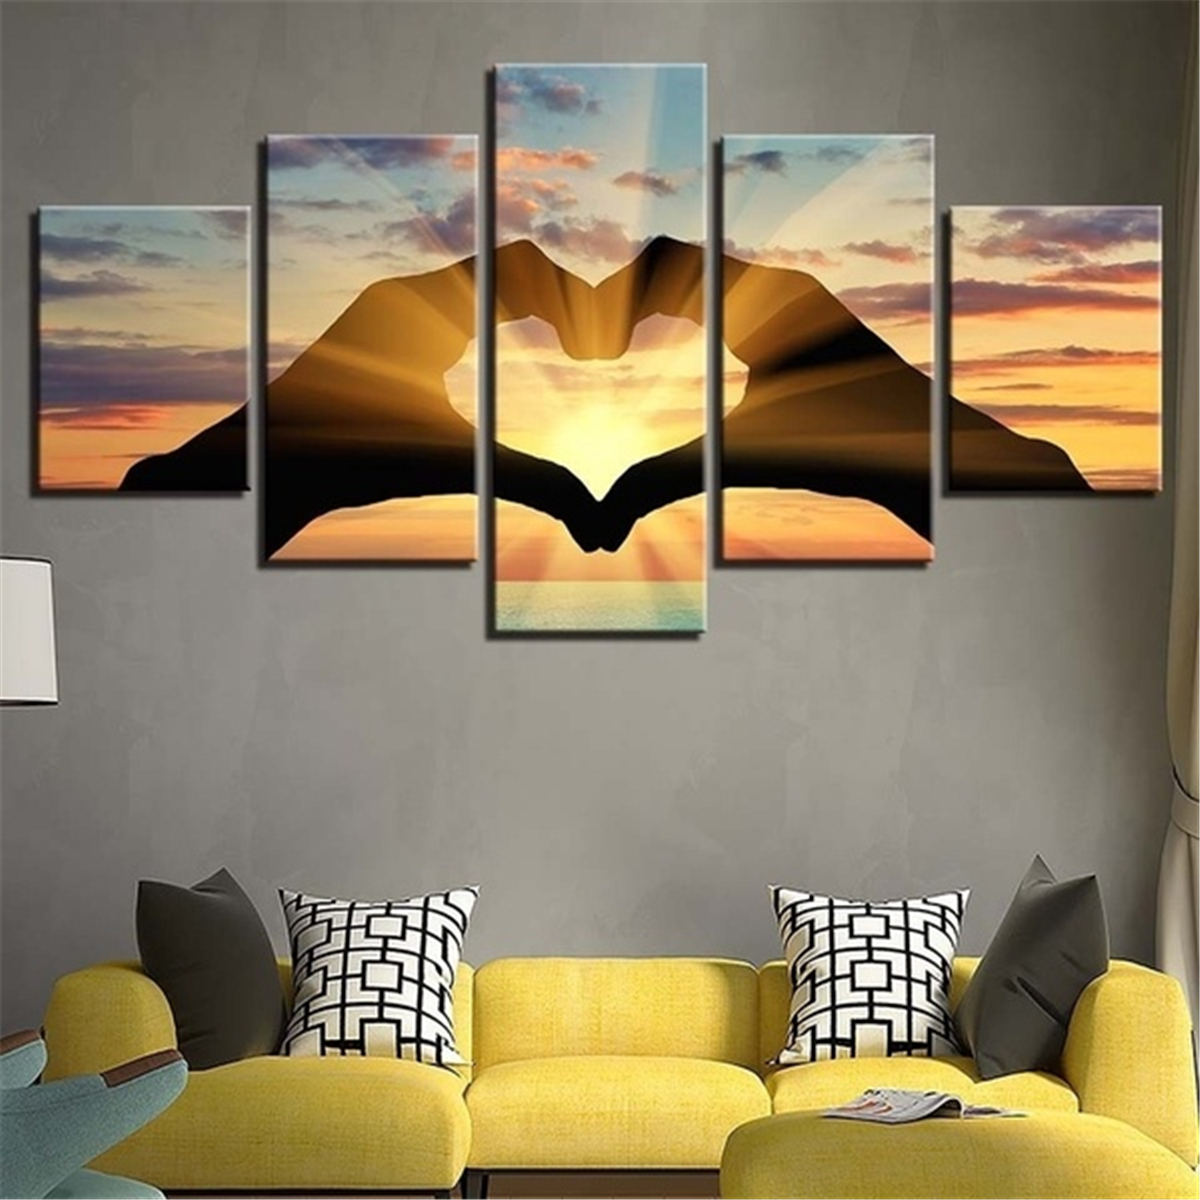 5-Pcs-Wall-Decorative-Painting-Couple-Love-Group-Wall-Decor-Art-Pictures-Canvas-Prints-Home-Office-H-1688799-6